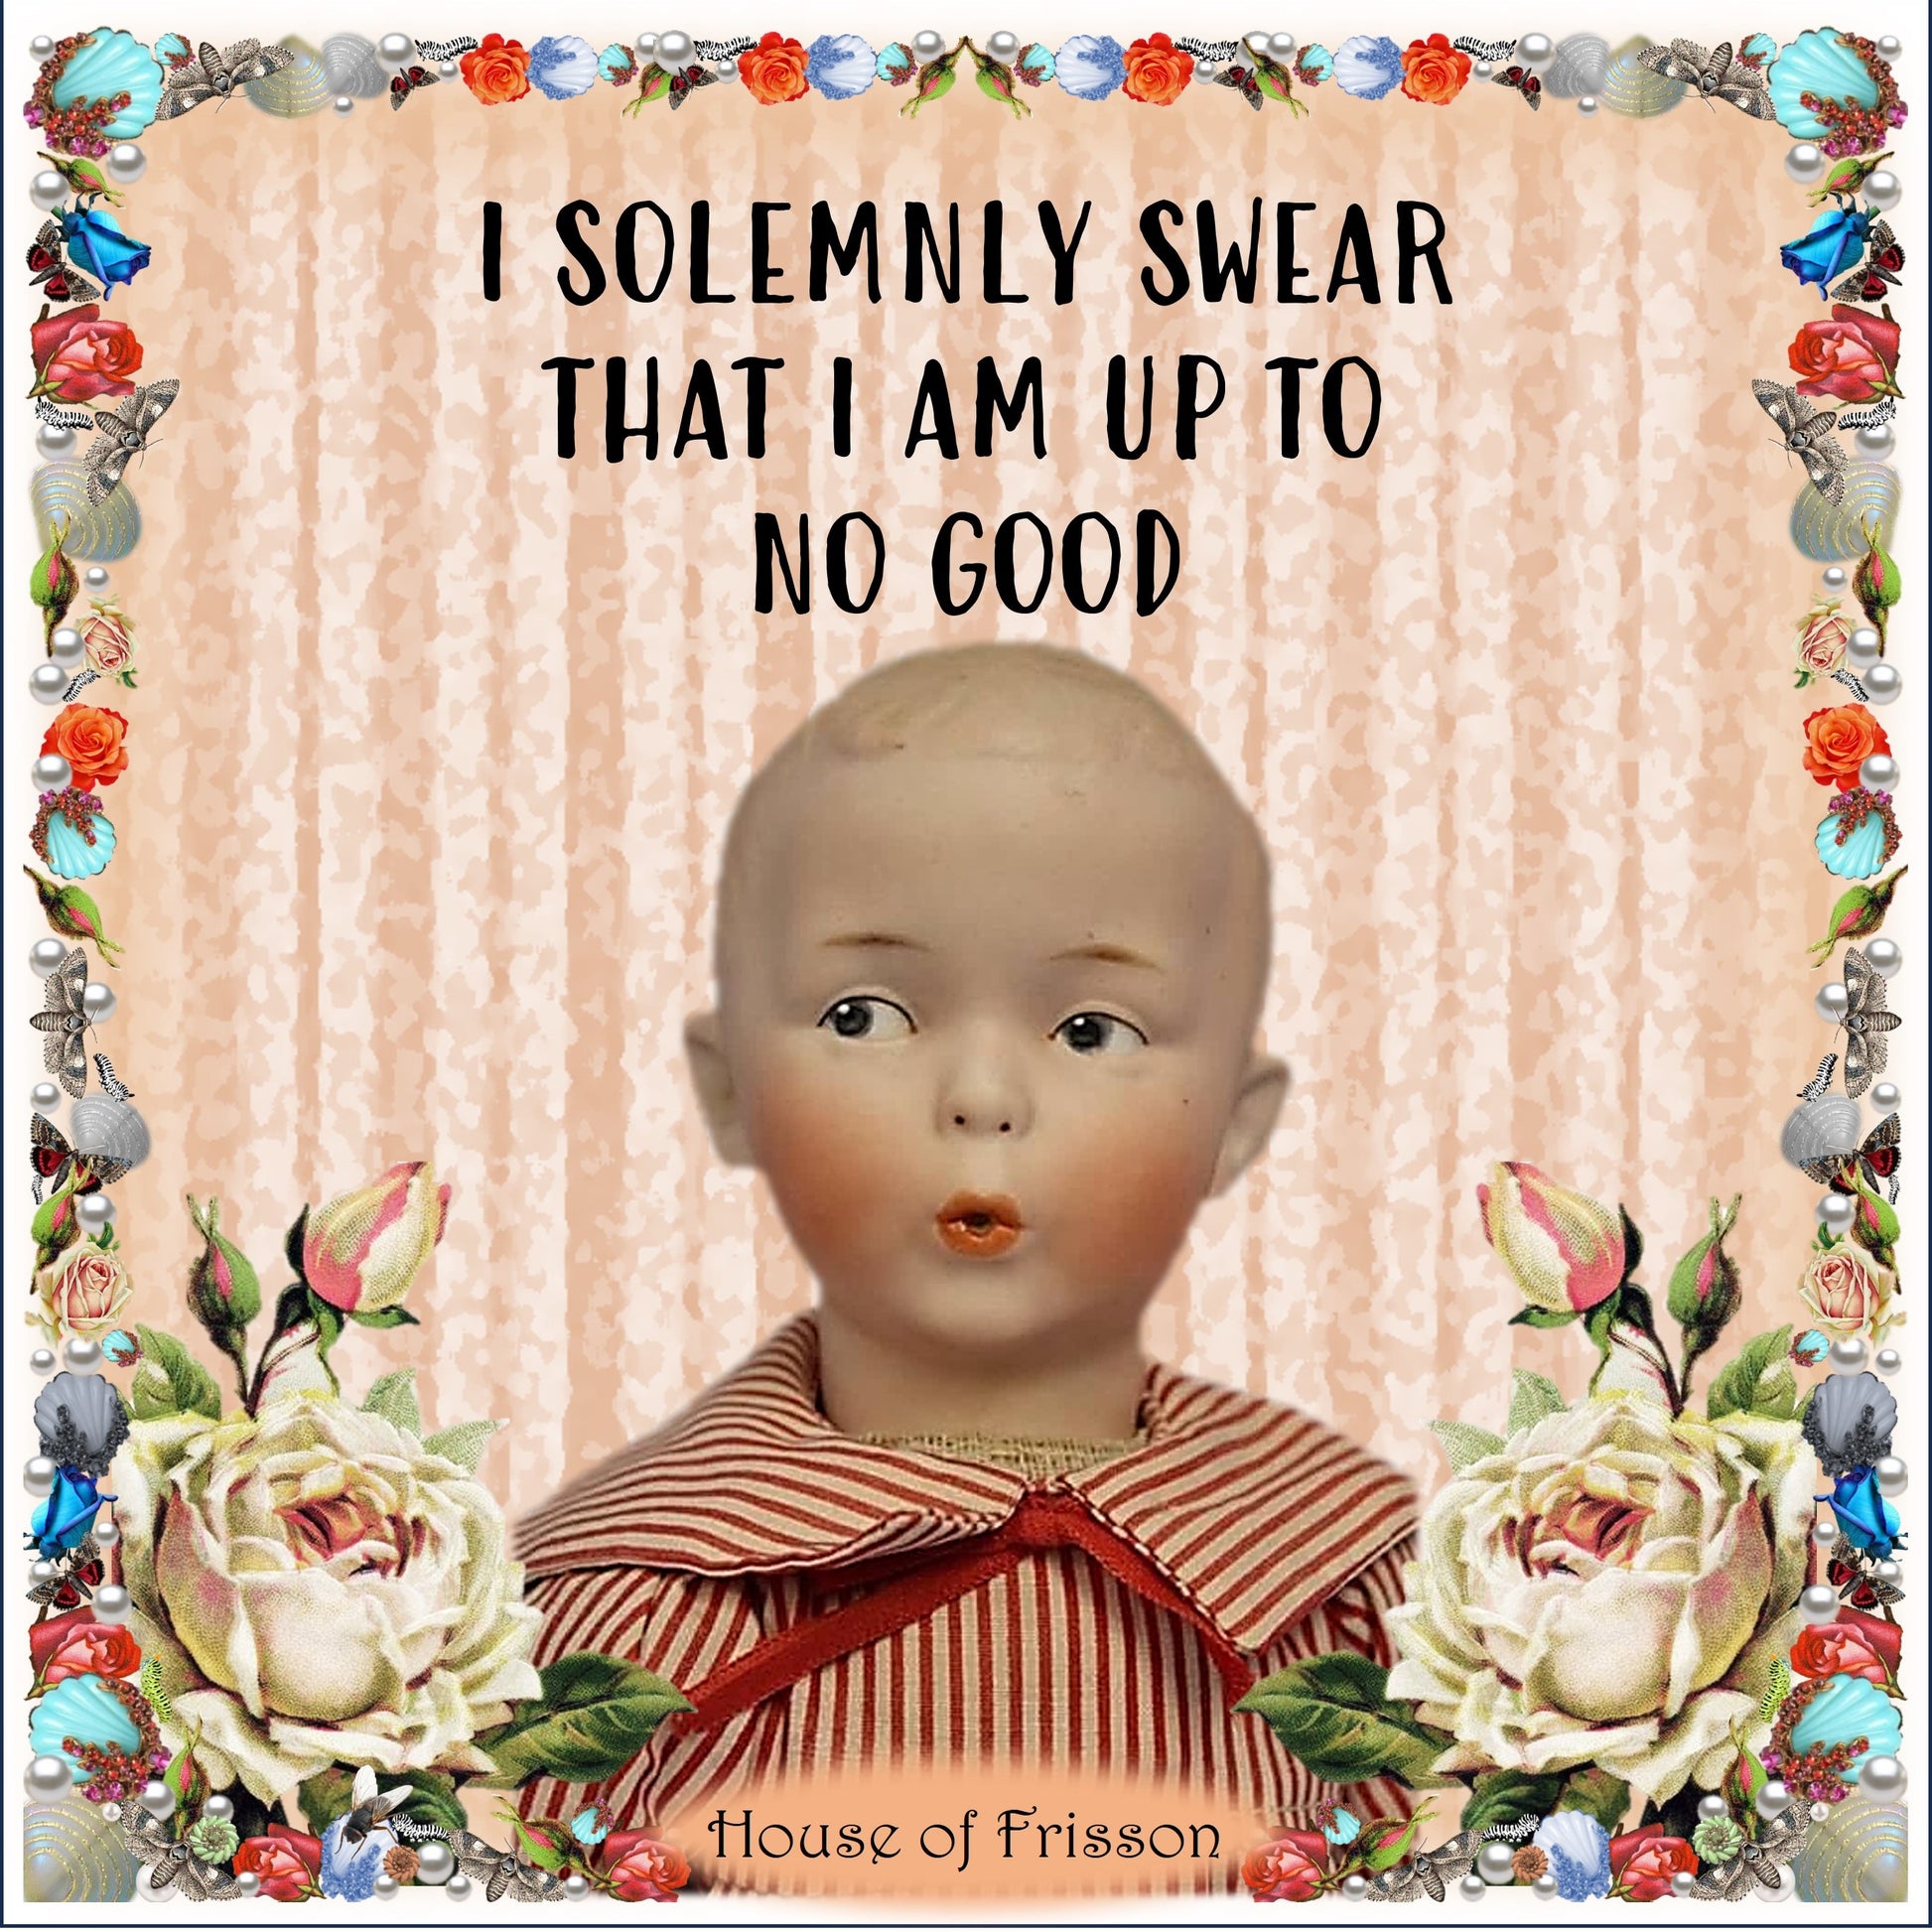 "I Solemnly Swear That I Am Up To No Good" Greeting Card by House of Frisson. Featuring a mischievous looking male doll framed by shells, pearls, moths, and roses. Closeup detail.